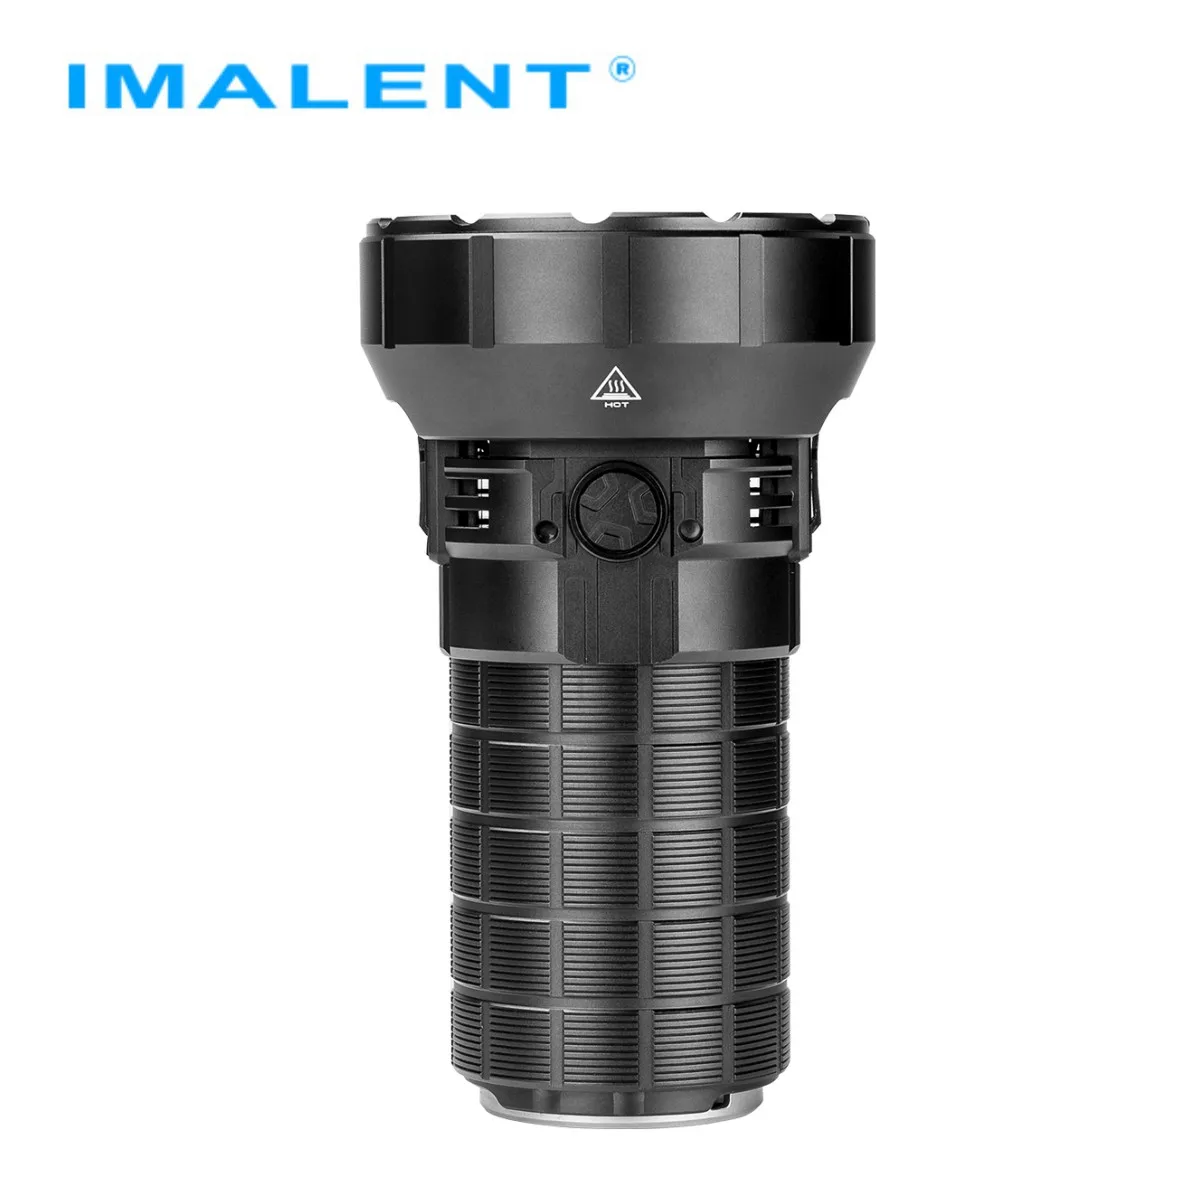 

IMALENT MS12 MINI High Power Flashlight 65000 Lumens CREE XHP70.2 LED Rechargeable Professional Super Bright Torch for Searching